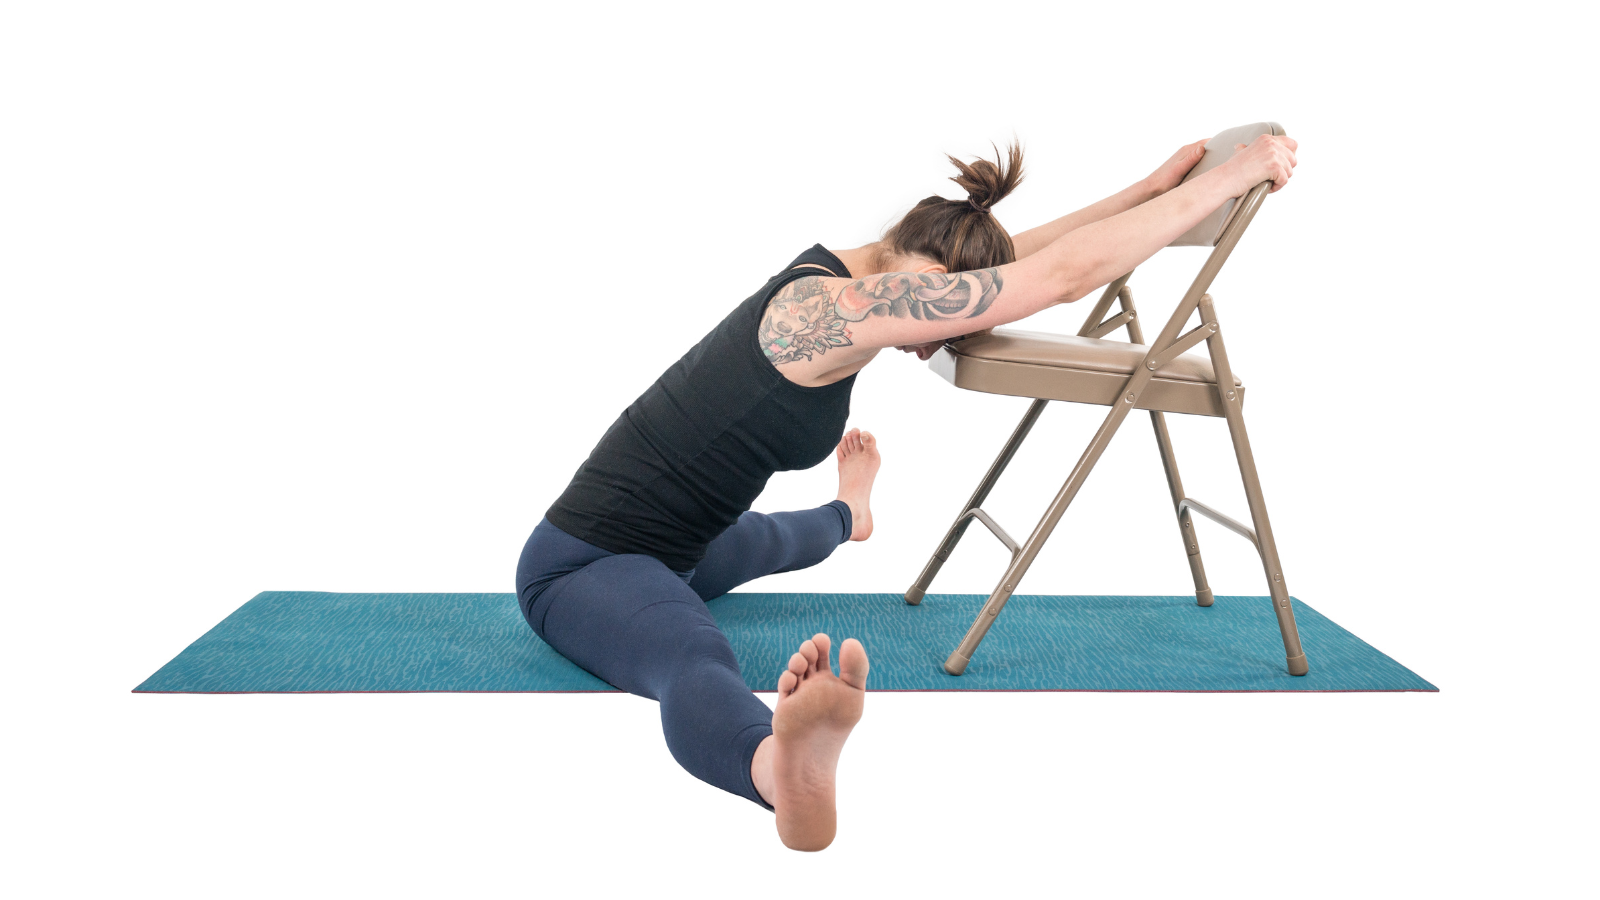 Practicing yoga's forward folds with a chair to support your arms and legs. 